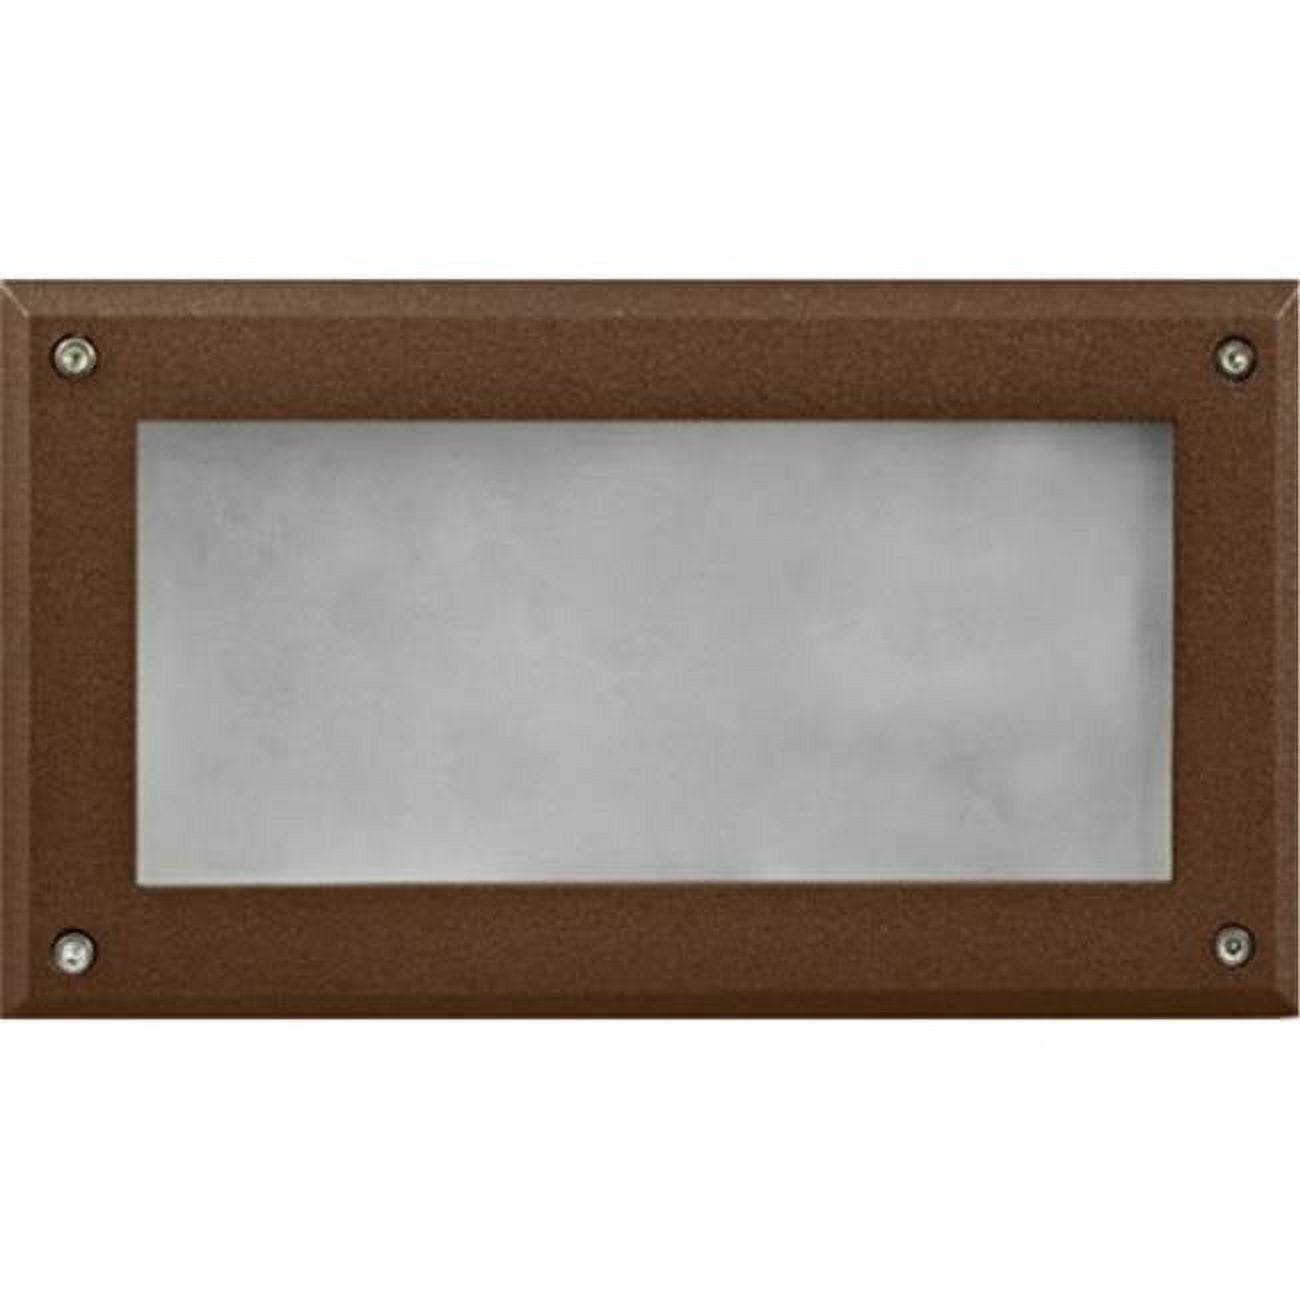 Picture of Dabmar Lighting DSL1013-BZ Recessed Open Face Brick, Step & Wall Light, Bronze - 5 x 8.90 x 3.15 in.